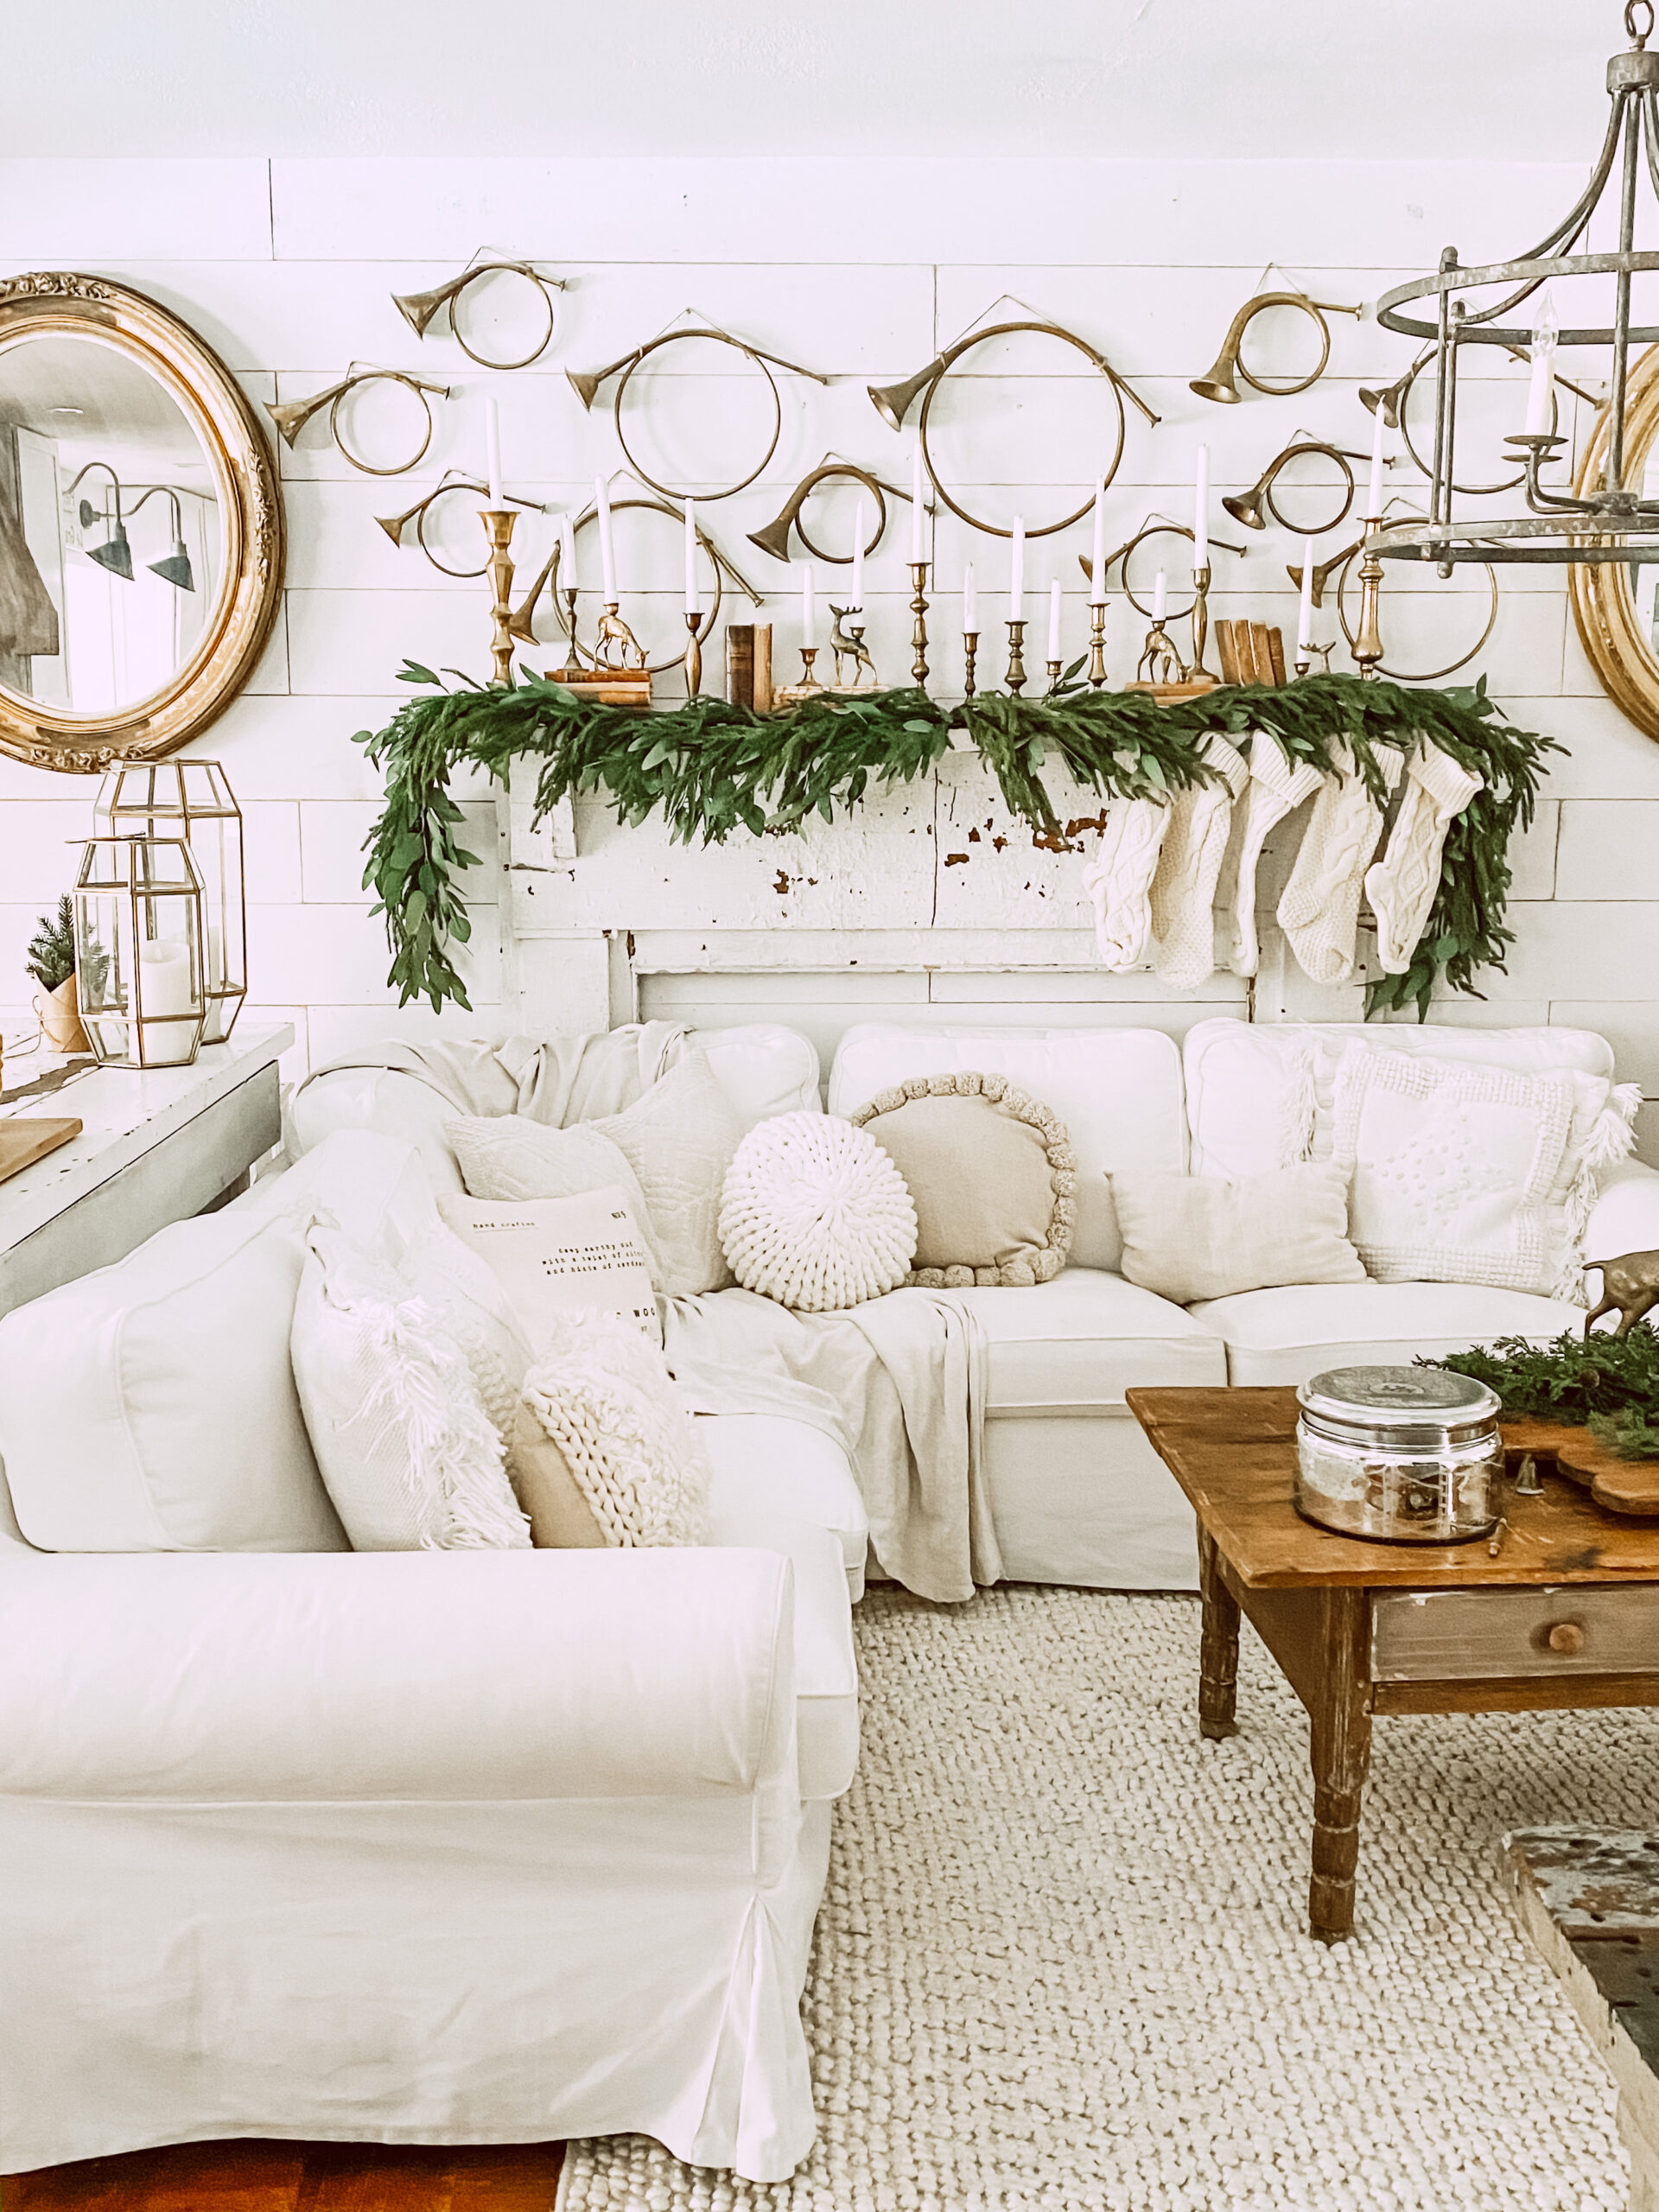 21 Favorite Christmas Decor Items You’ll Love This Year